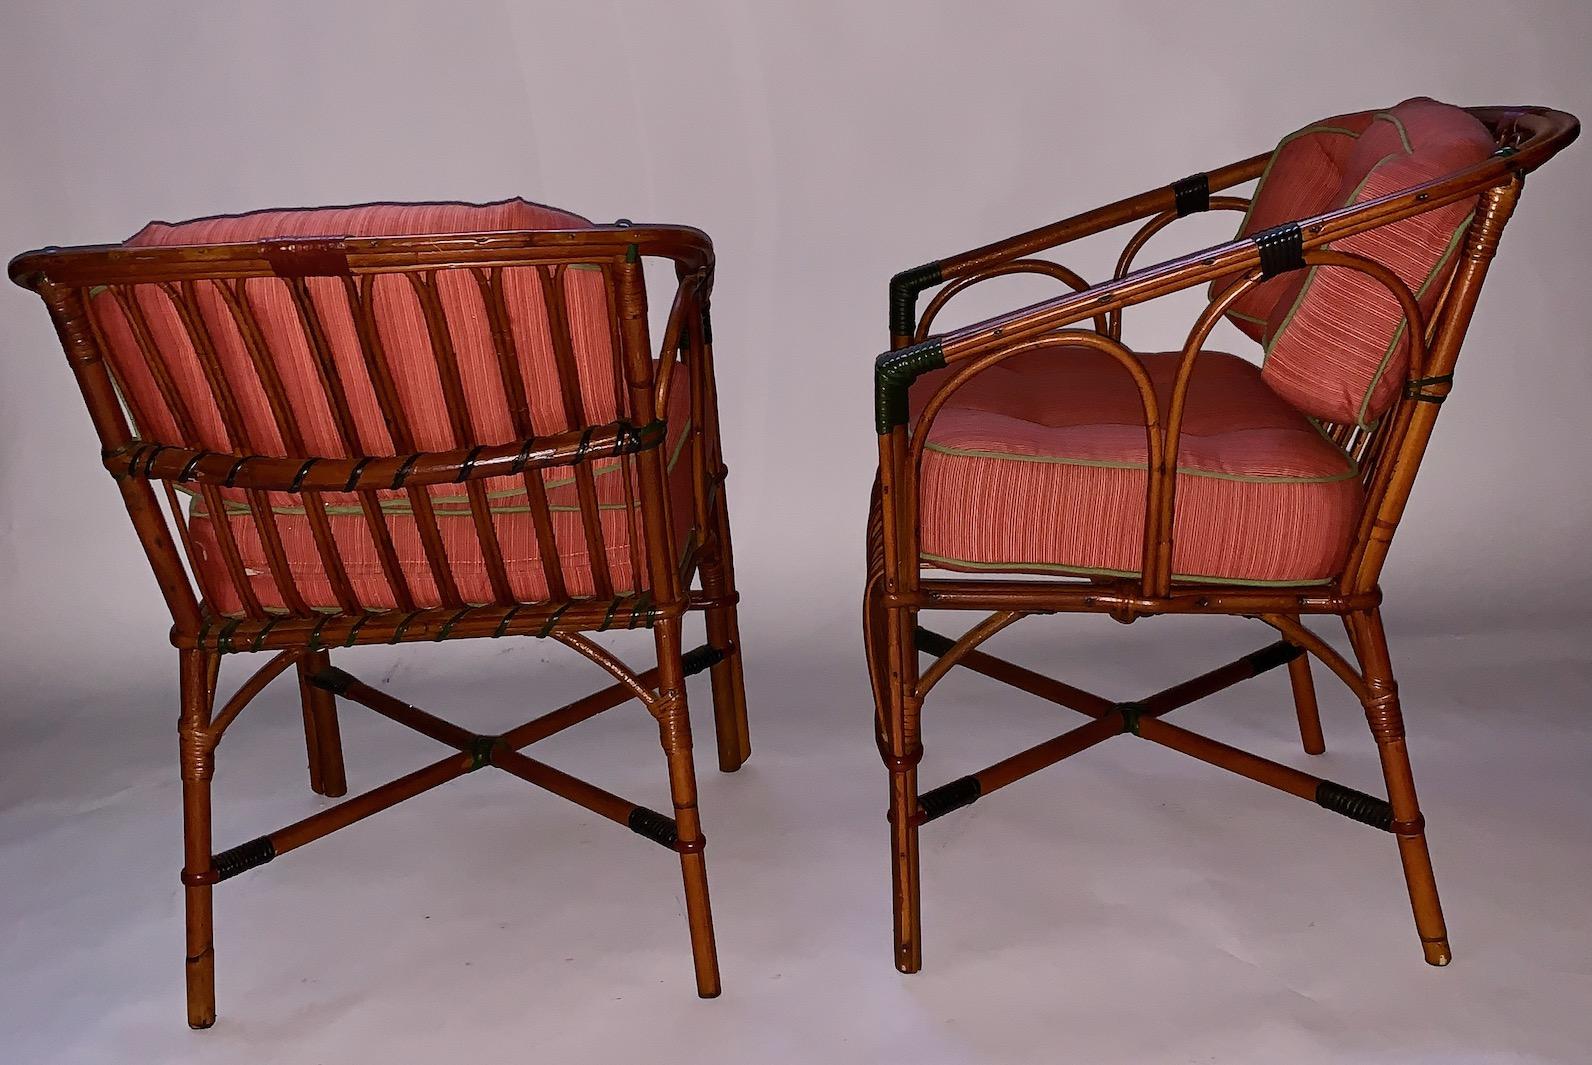 A very comfortable pair of rattan arm / dining chairs, American, C. 1 930s with newly upholstered back and seat cushions upholstered in Sunbrella outdoor fabrics in Papaya with Cilantro fabric welting, both the back and bottom cushions are attached